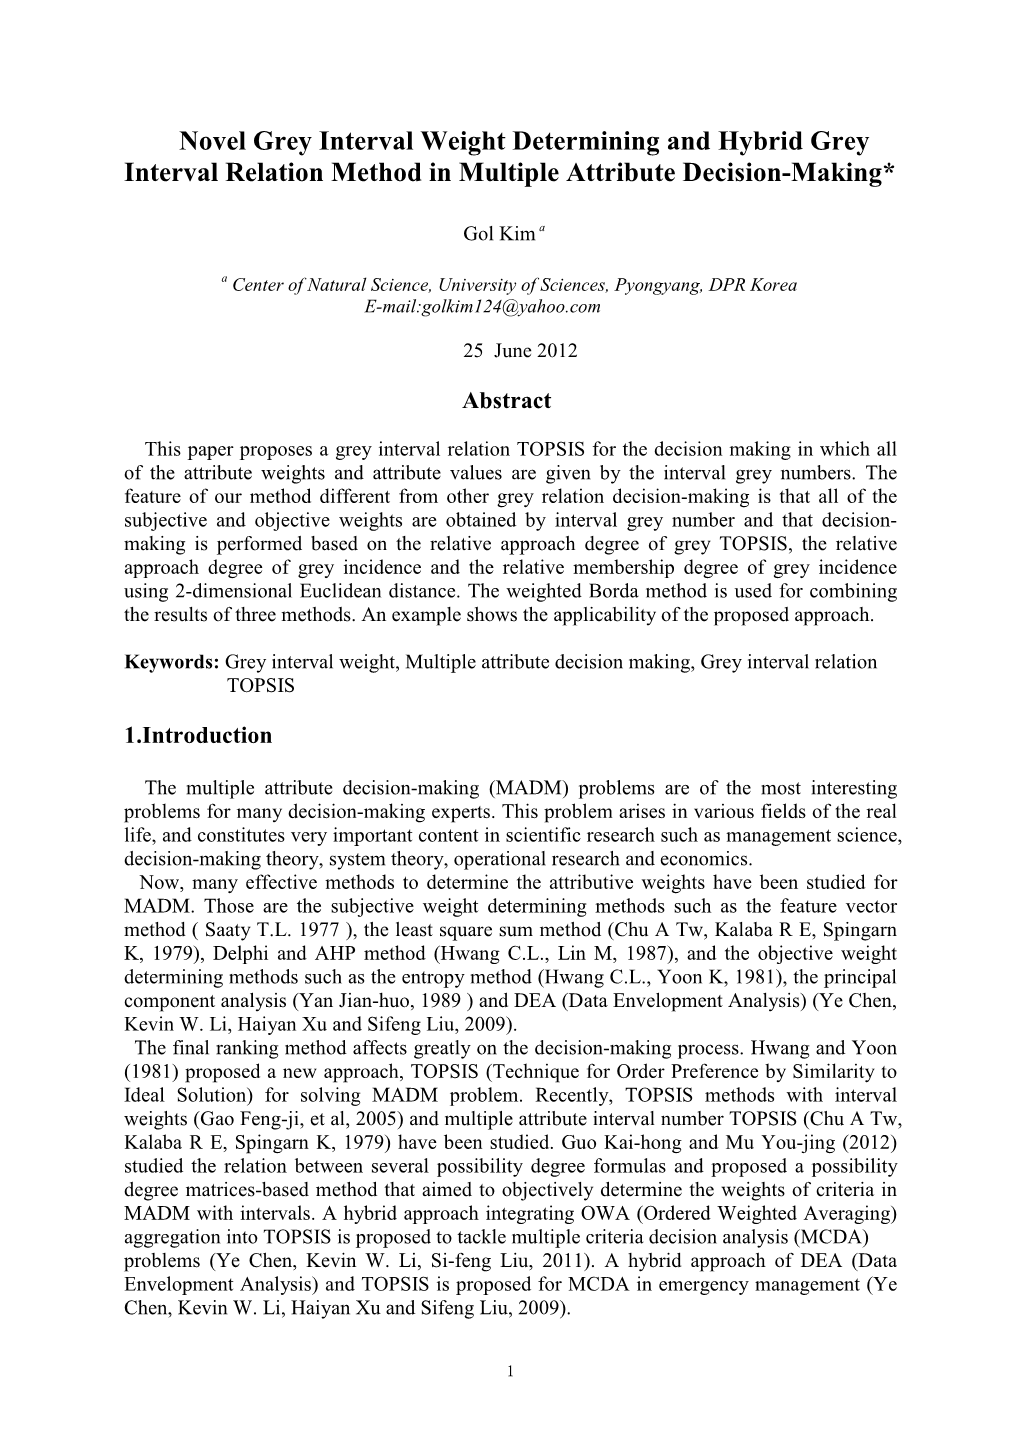 Novel Grey Interval Weight Determining and Hybrid Grey Interval Relation Method in Multiple Attribute Decision-Making*